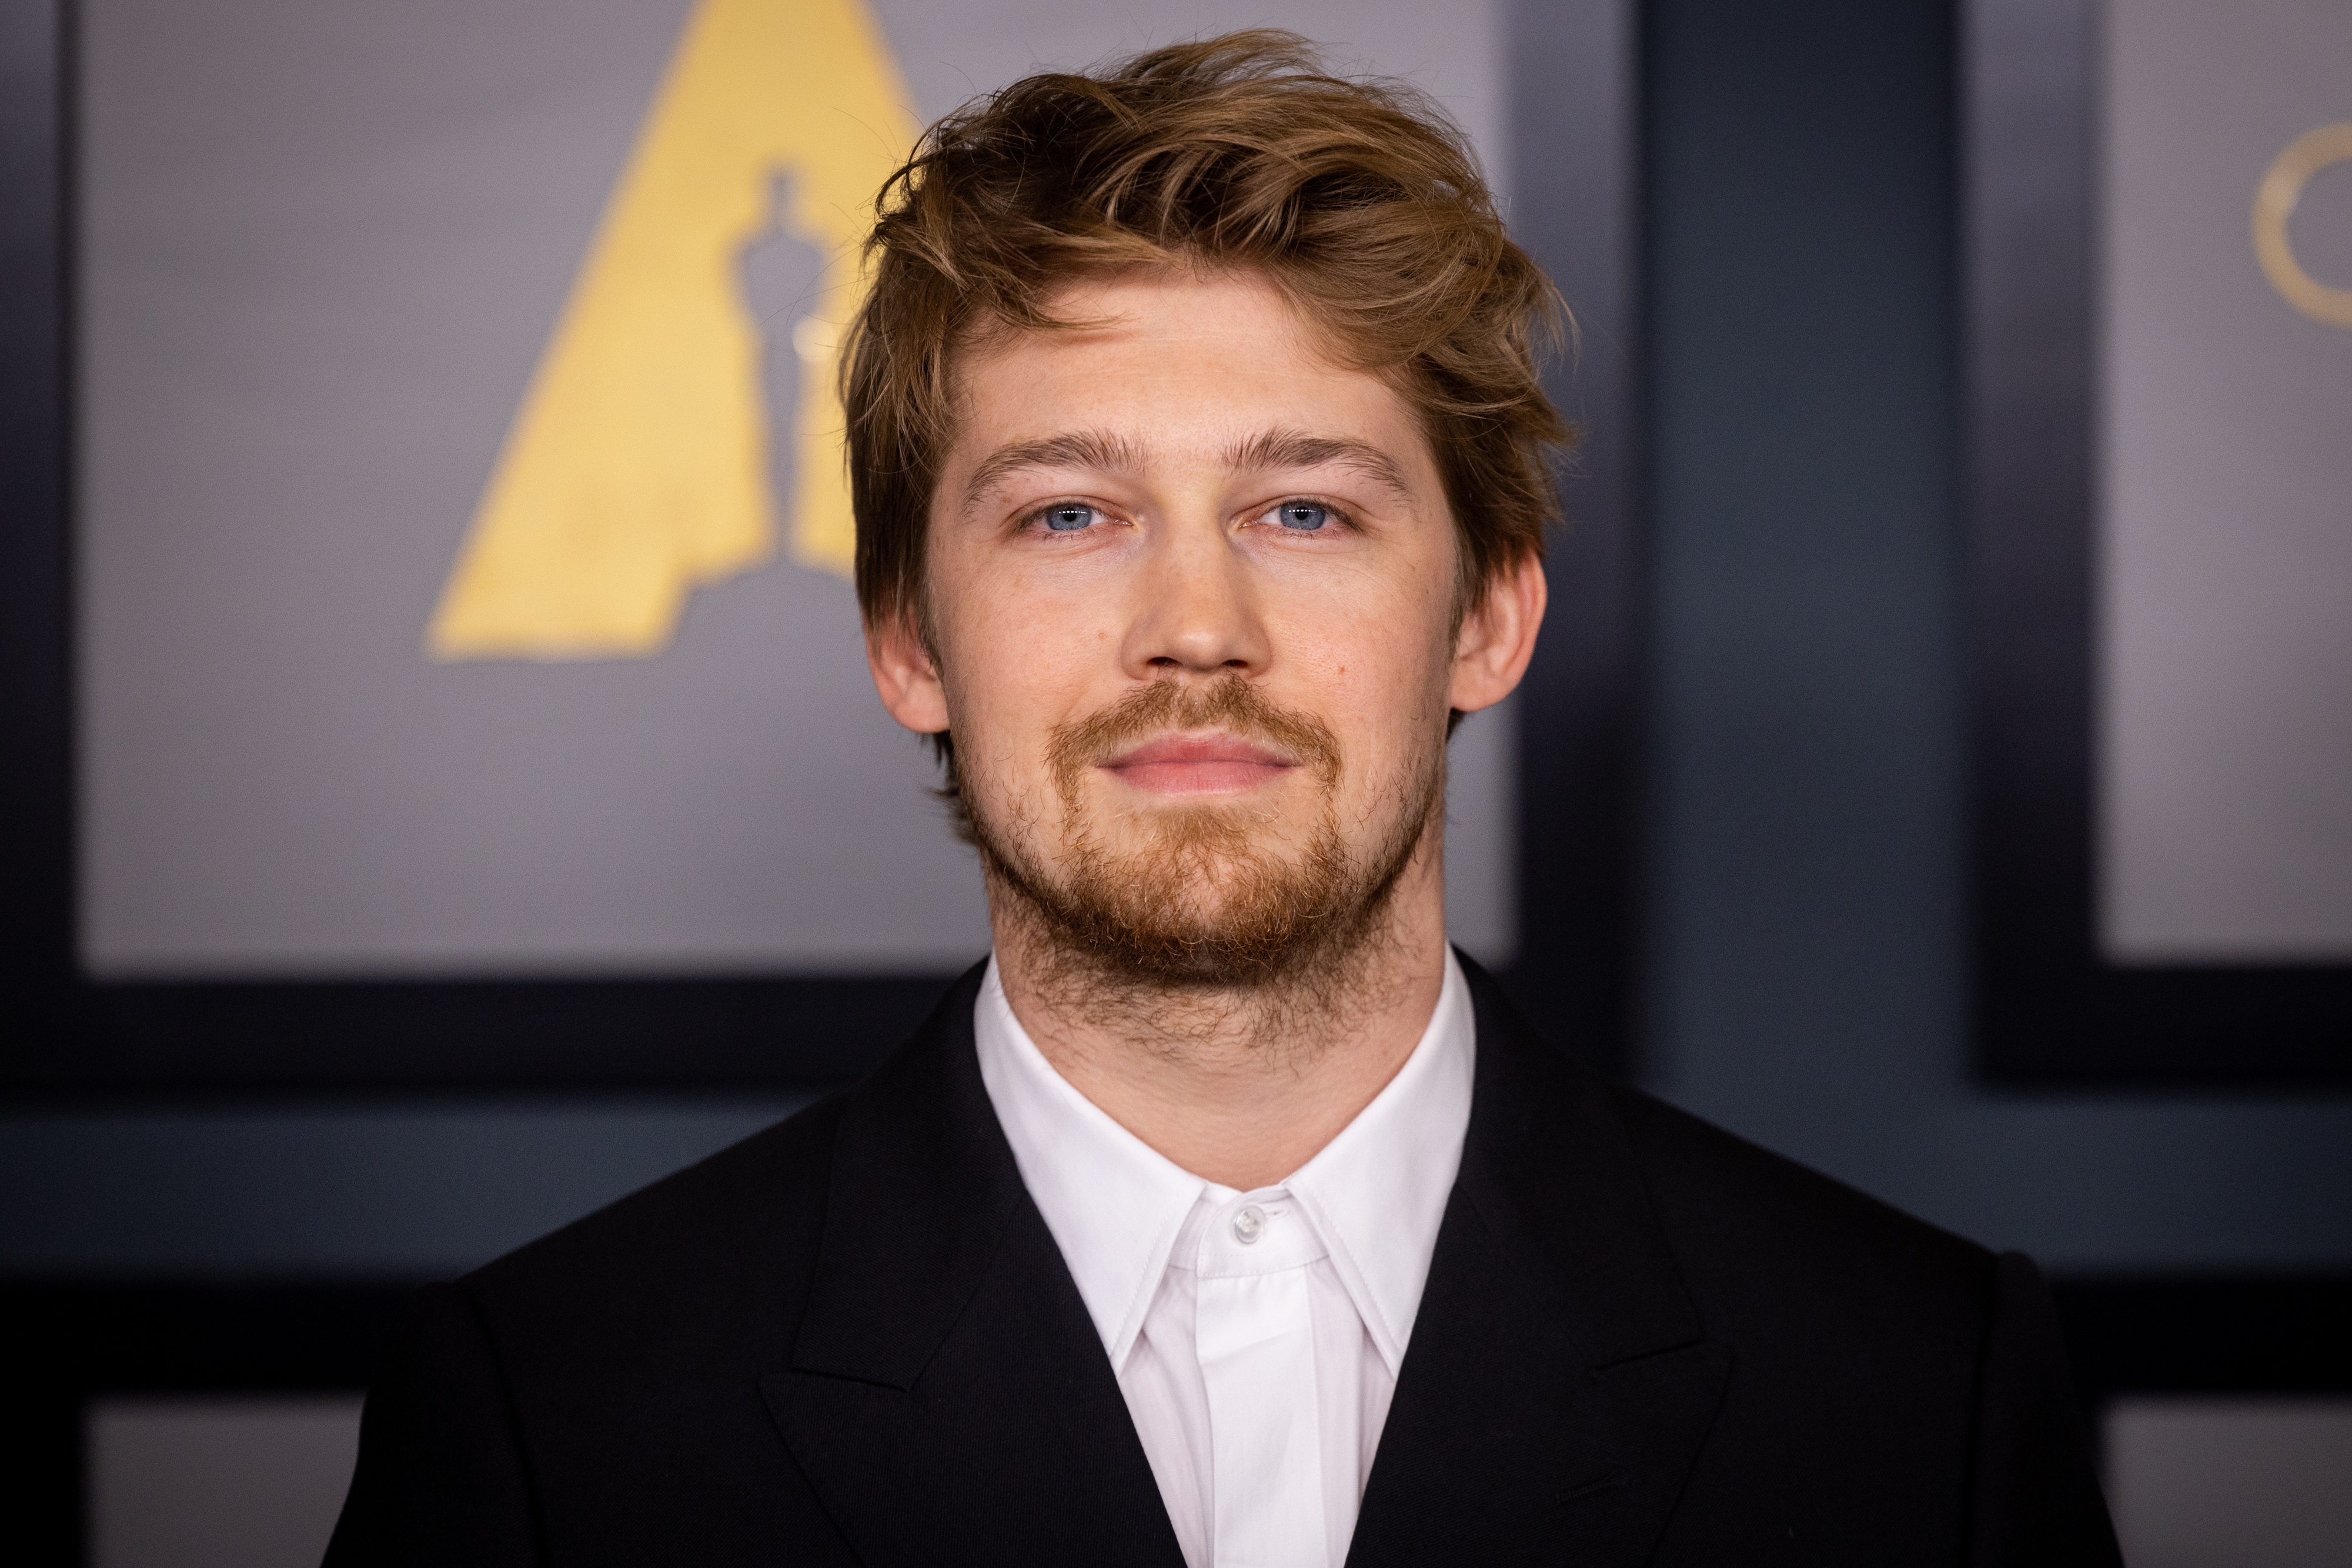 Joe Alwyn in a suit posing for a photo at a media event